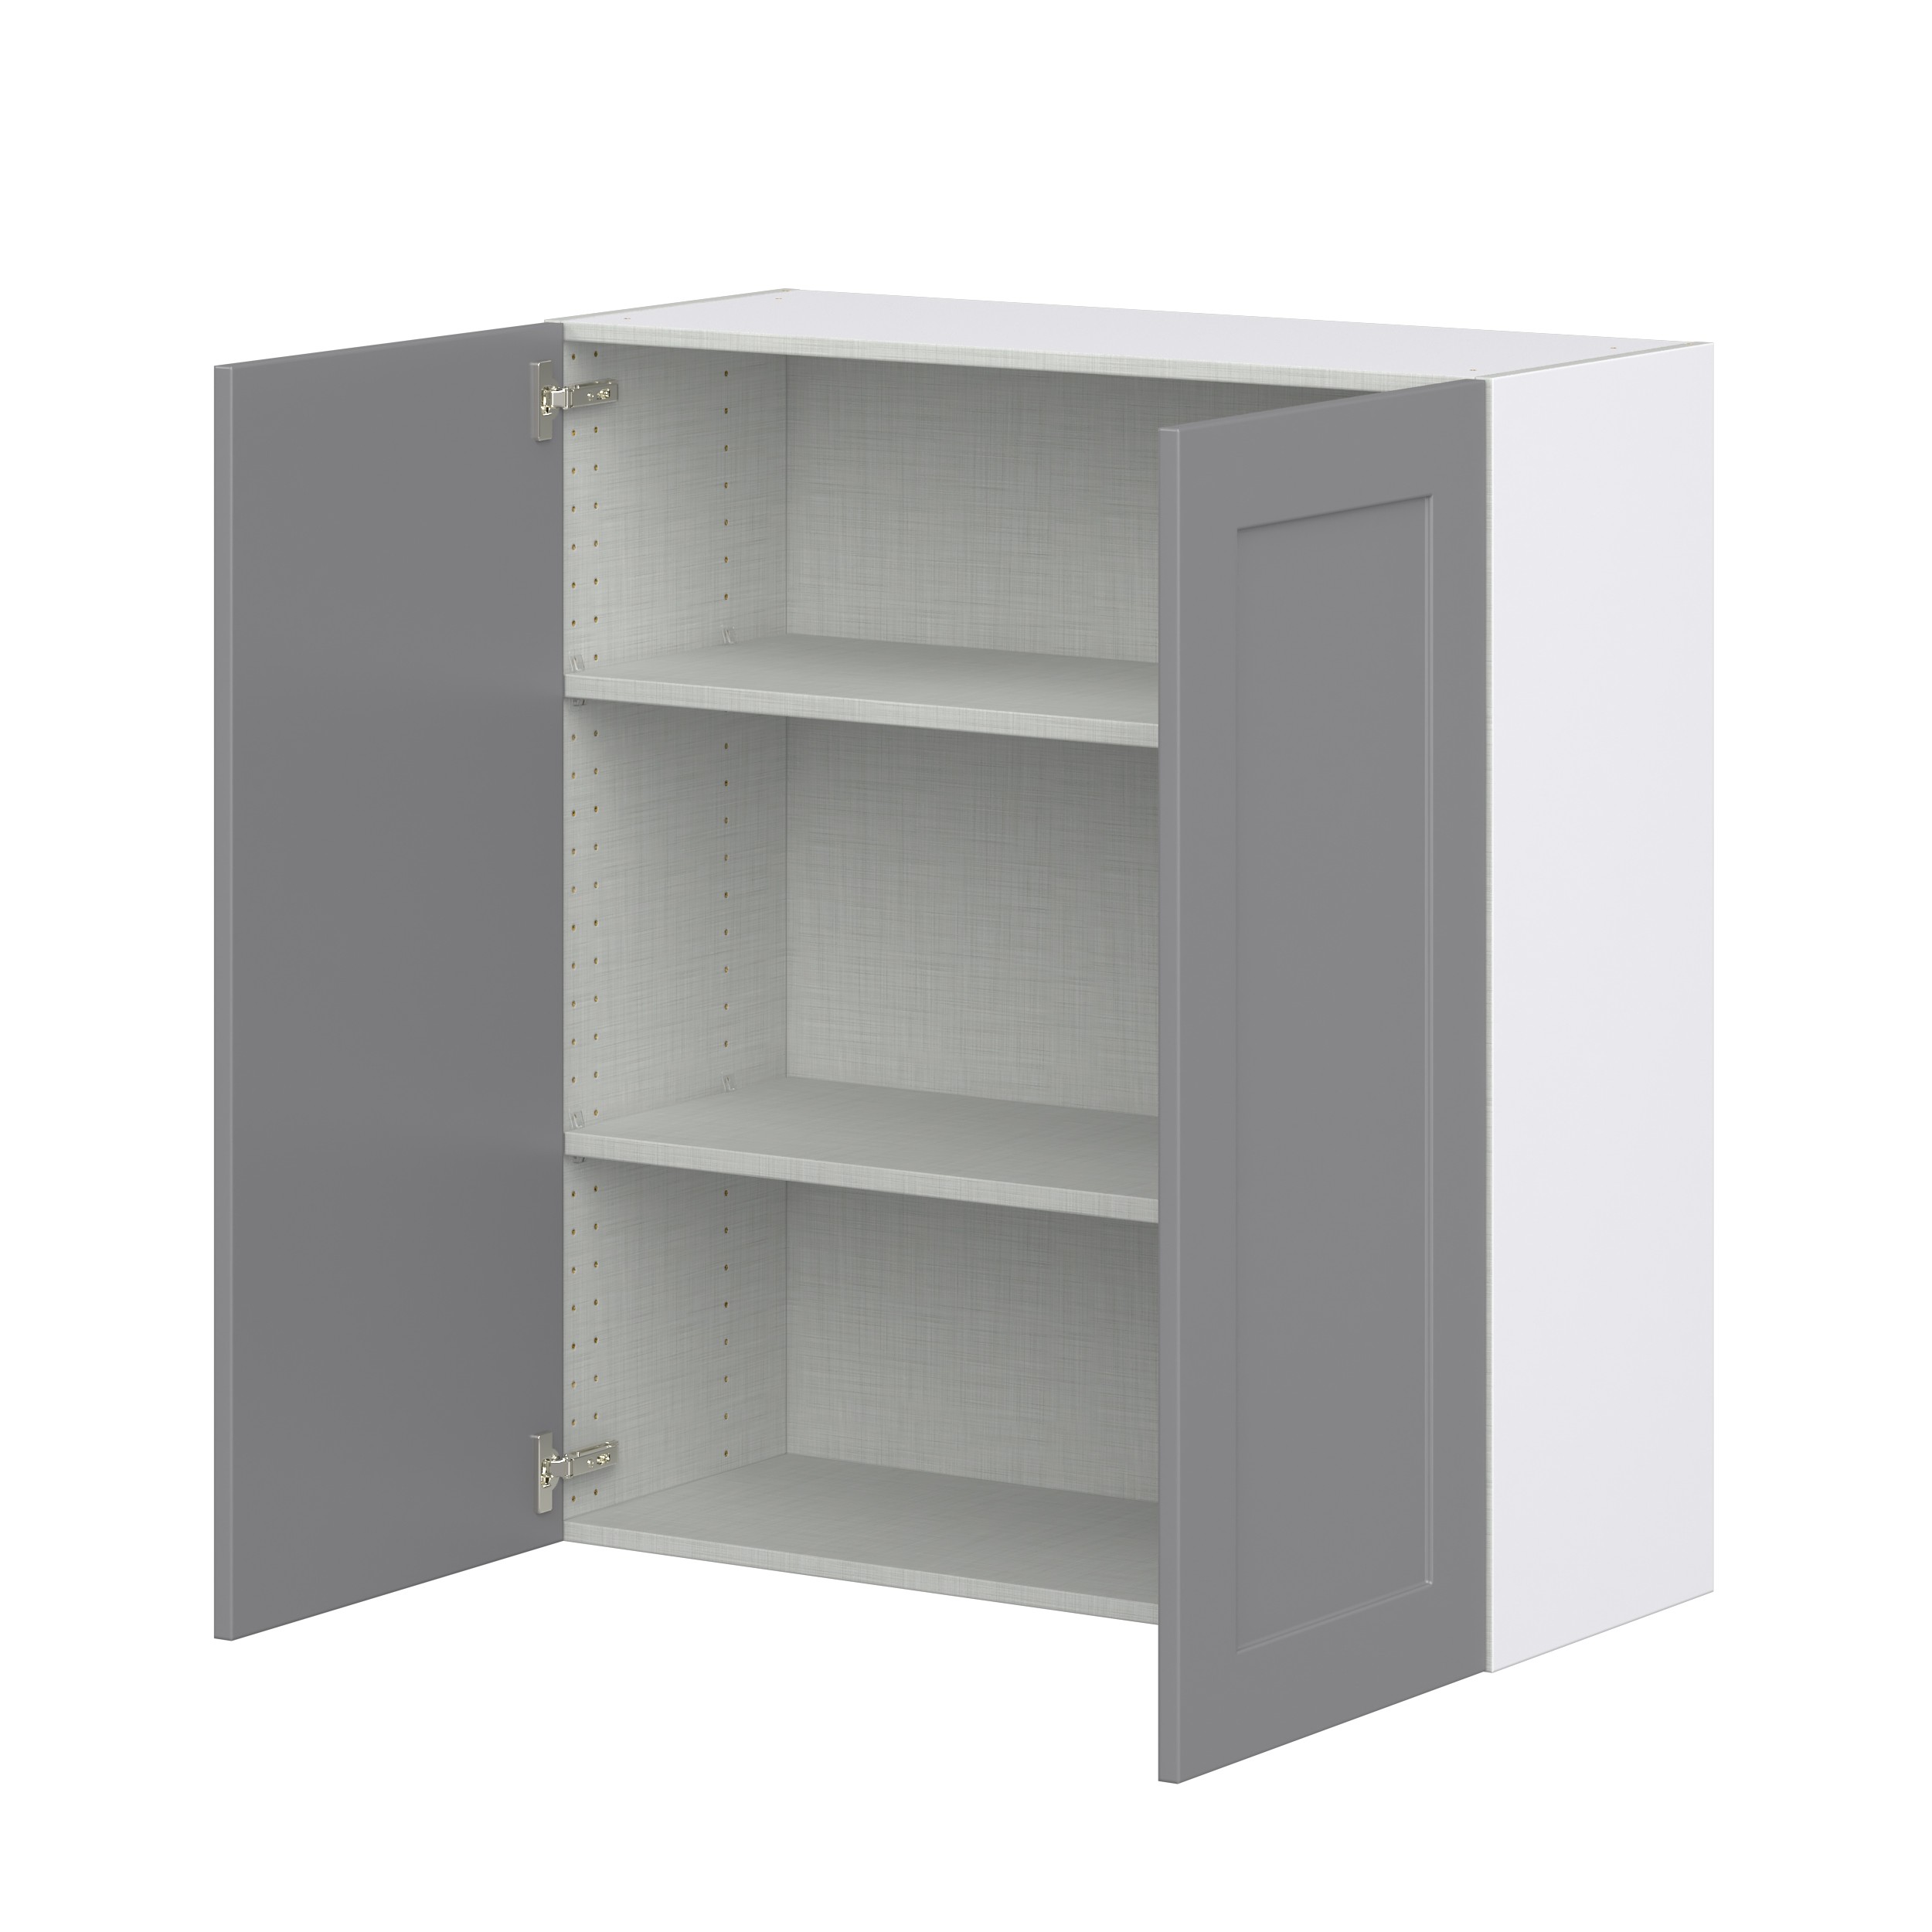 Willow Painted Slate Gray Shaker Assembled Wall Cabinet with 2 Full High Doors (36 in. W x 40 in. H x 14 in. D)